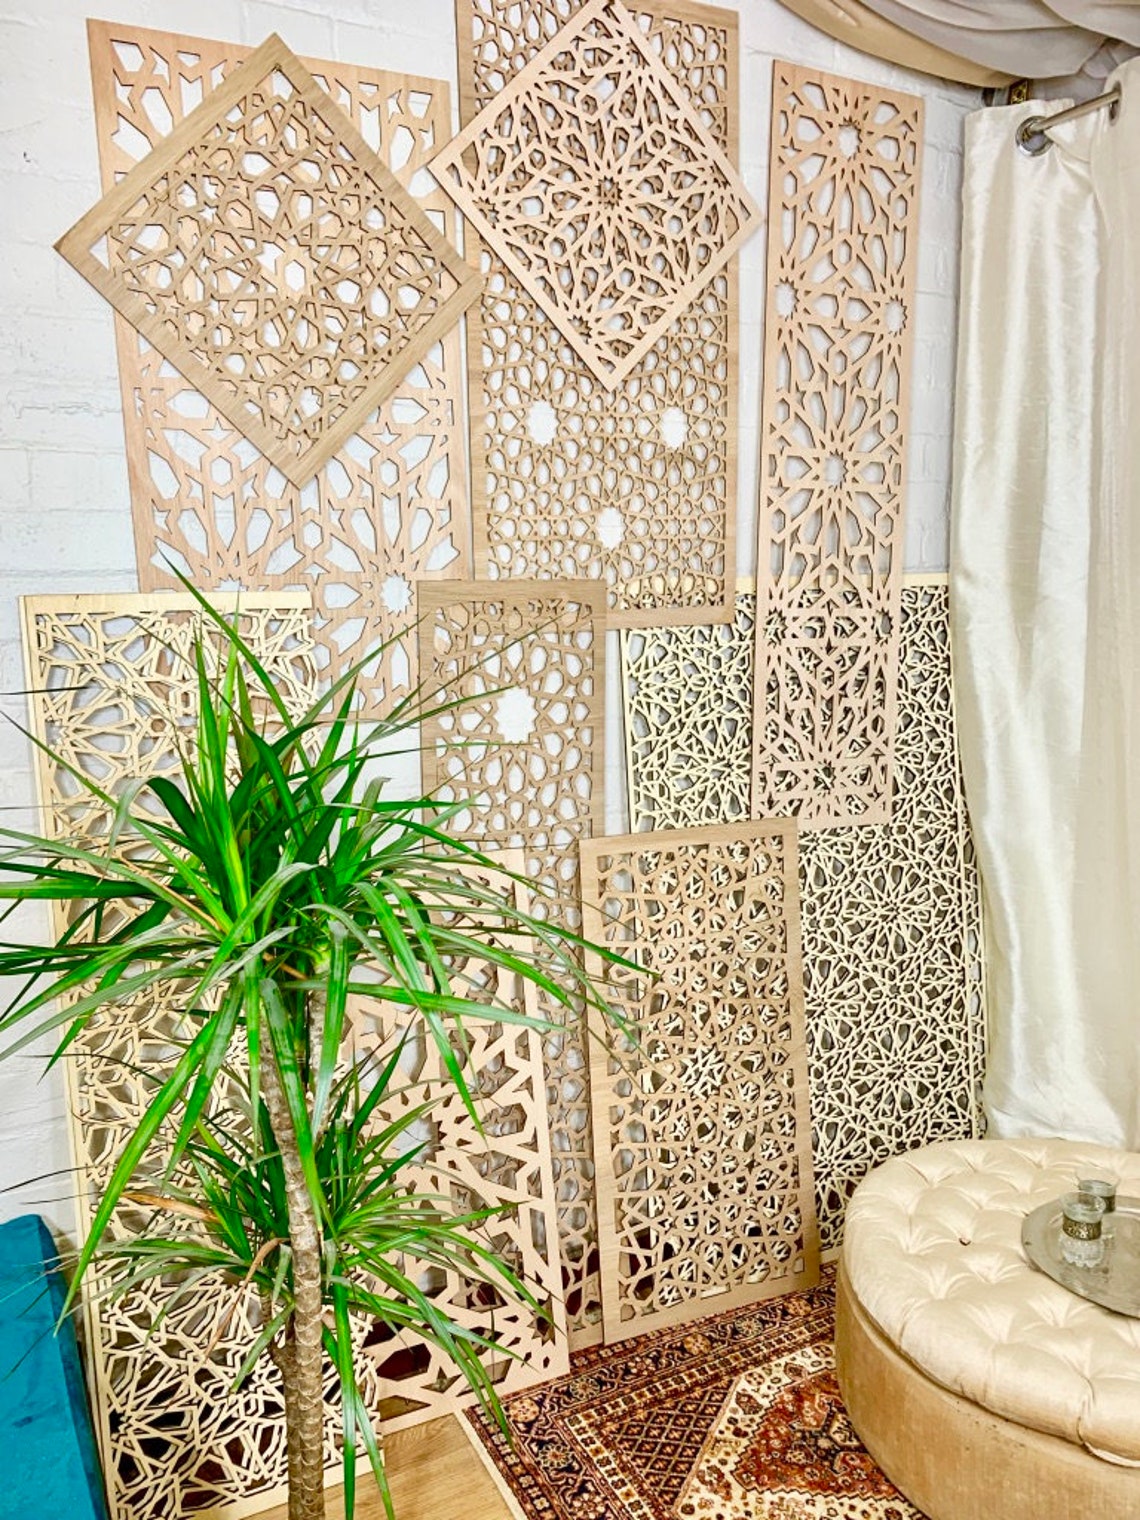  Decorative wood panels| Traditional Moroccan furniture